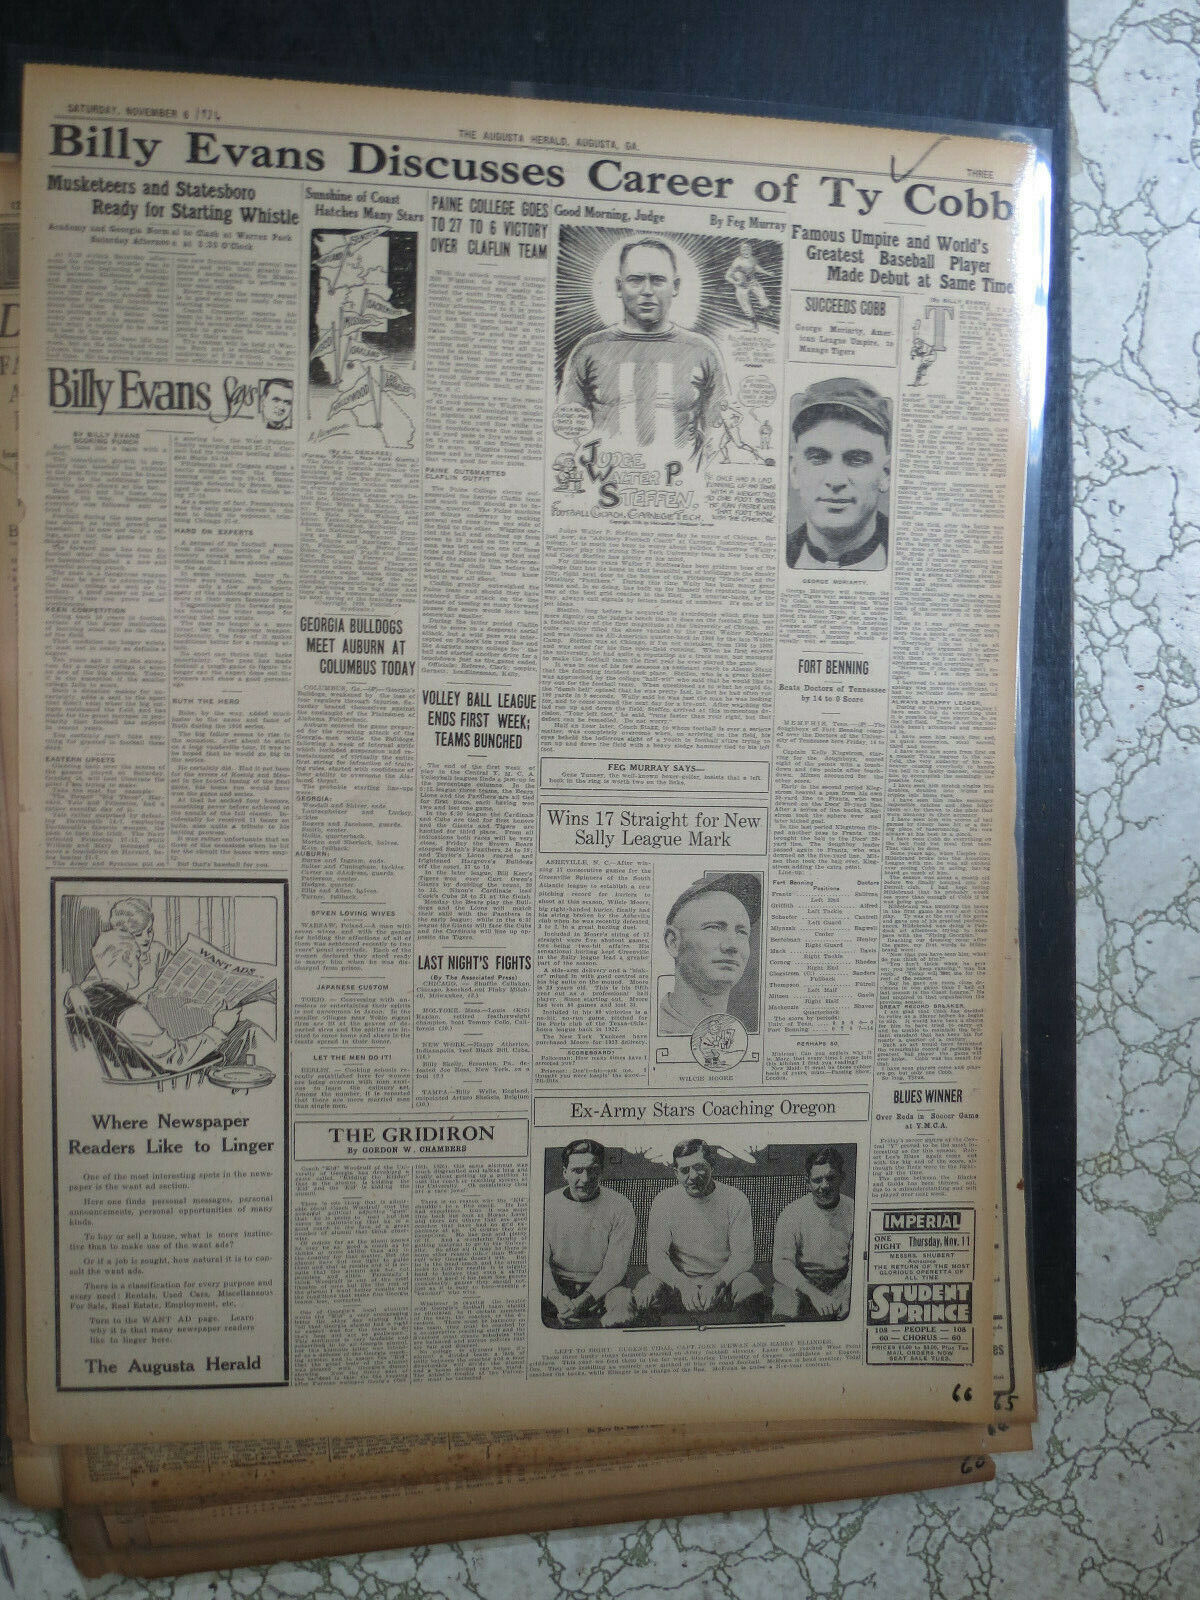 Sports Hero Newspaper 1926 TY COBB CAREER DISCUSSED BY EMPIRE EVANS + FOOTBALL 